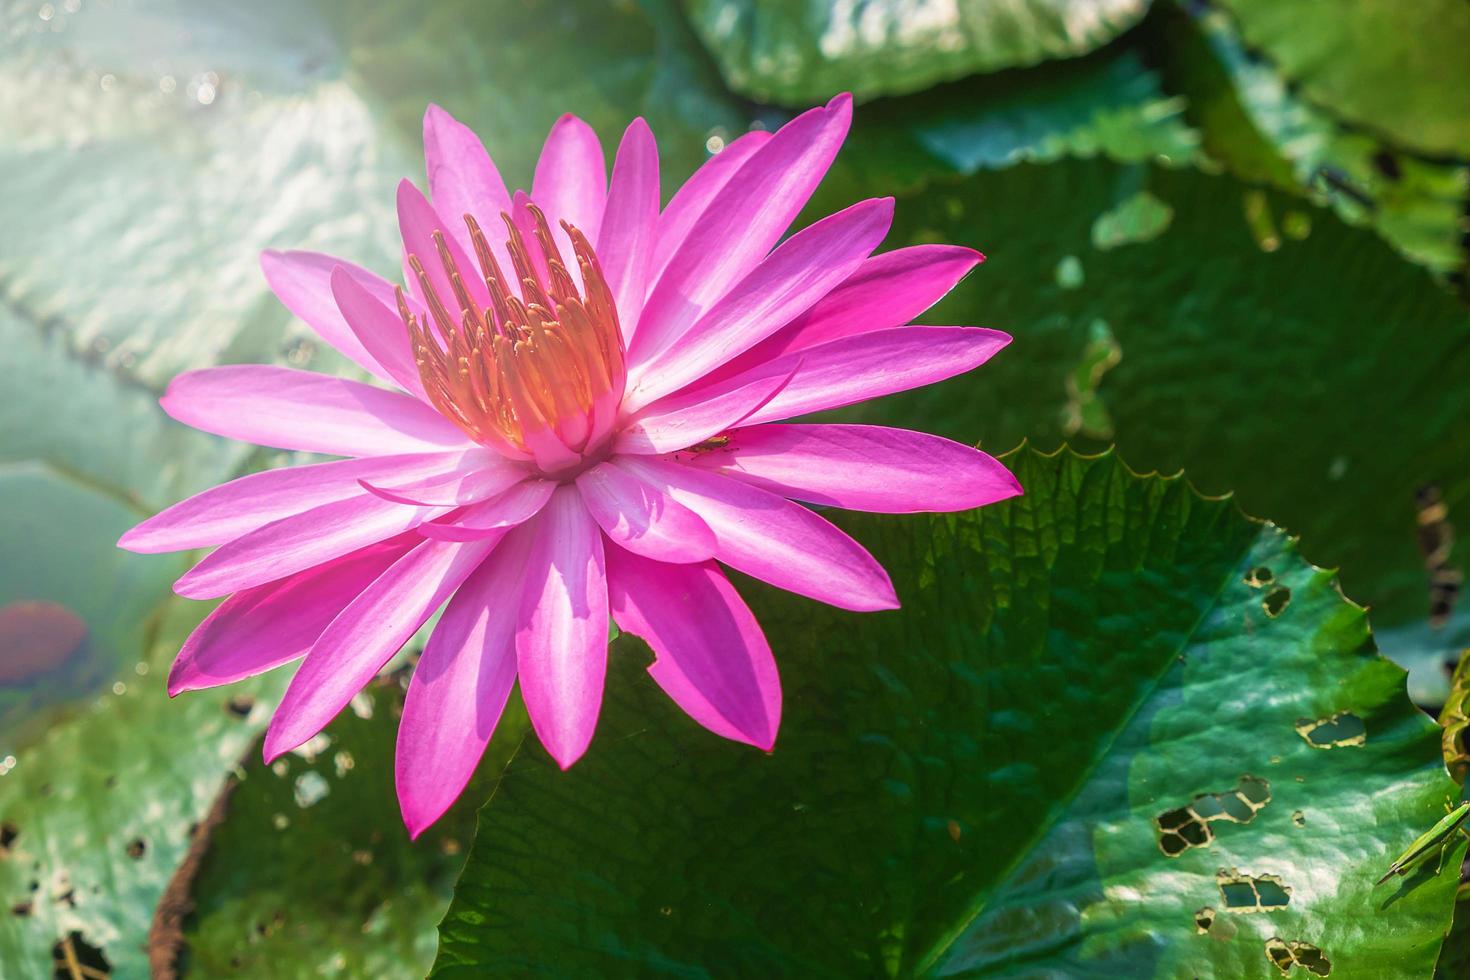 Lotus flower in a pond photo